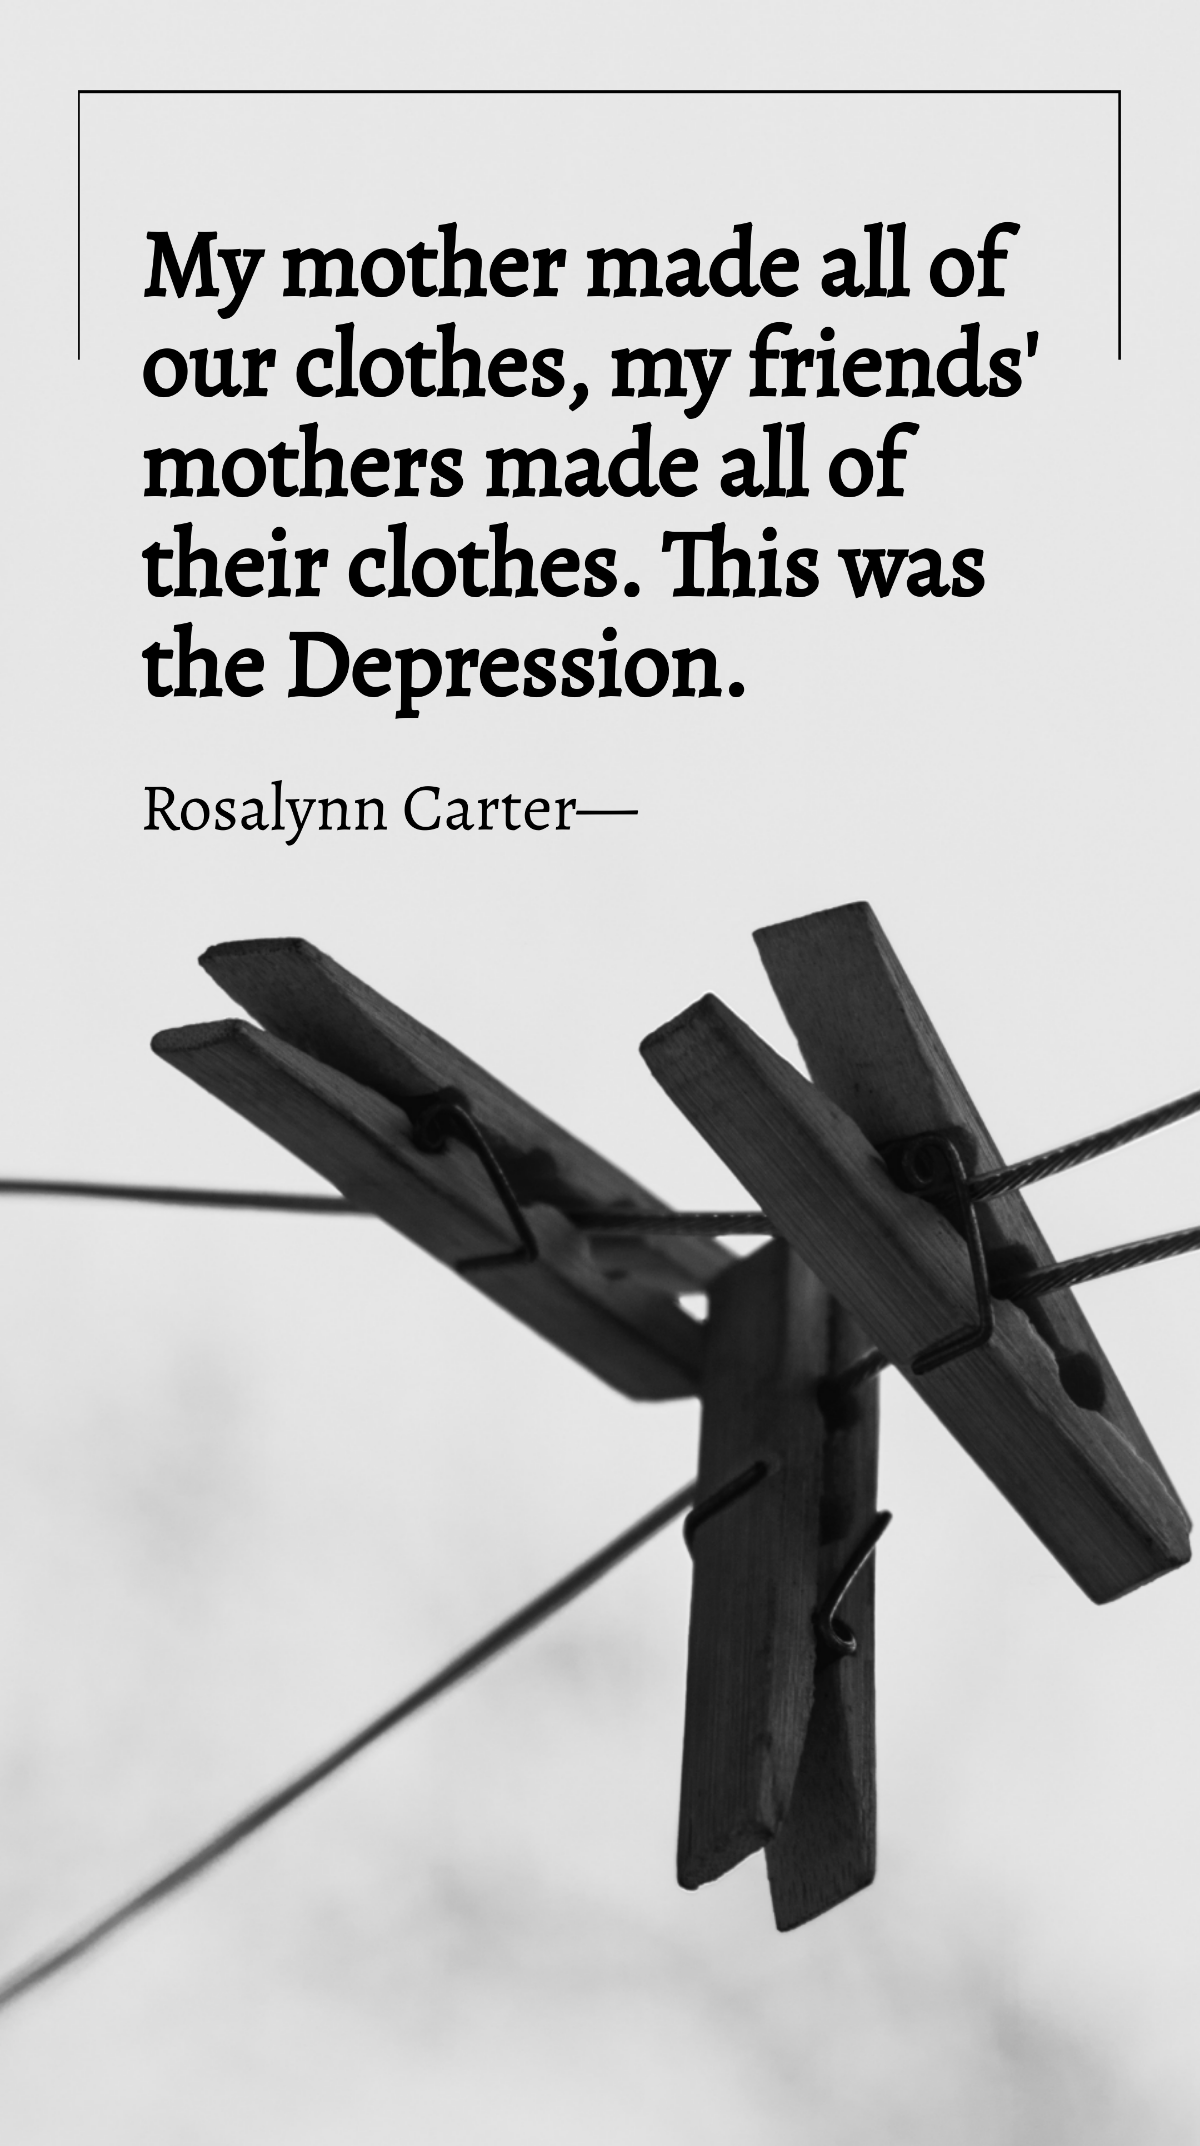 Rosalynn Carter - My mother made all of our clothes, my friends' mothers made all of their clothes. This was the Depression. Template